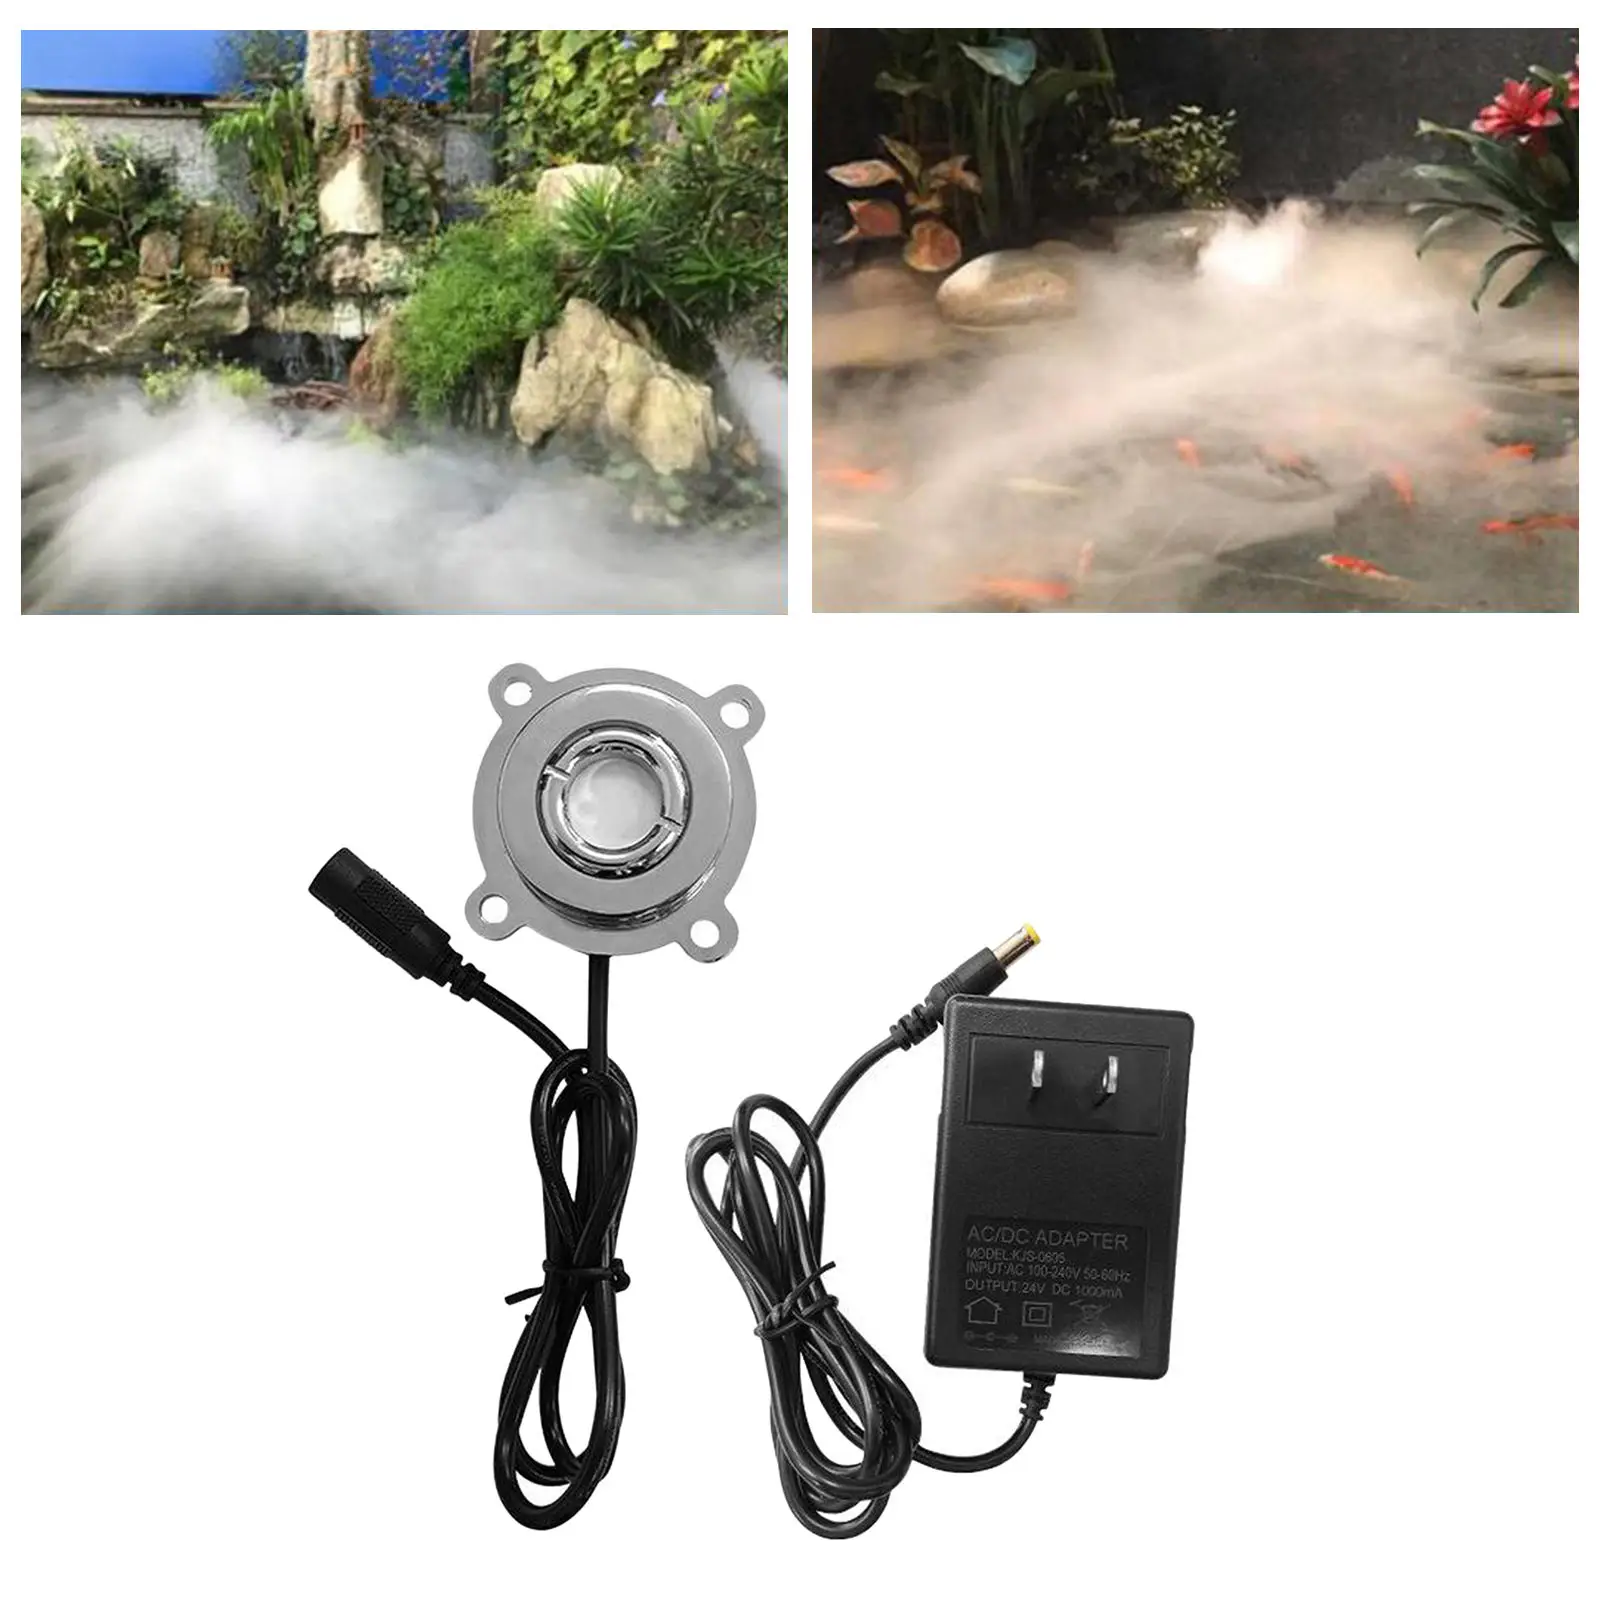 36V Mist Maker Fogger Ultrasonic Mister Fog Machine for Rockery Fish Tank Atomizer Air Humidifier Water Feature Office